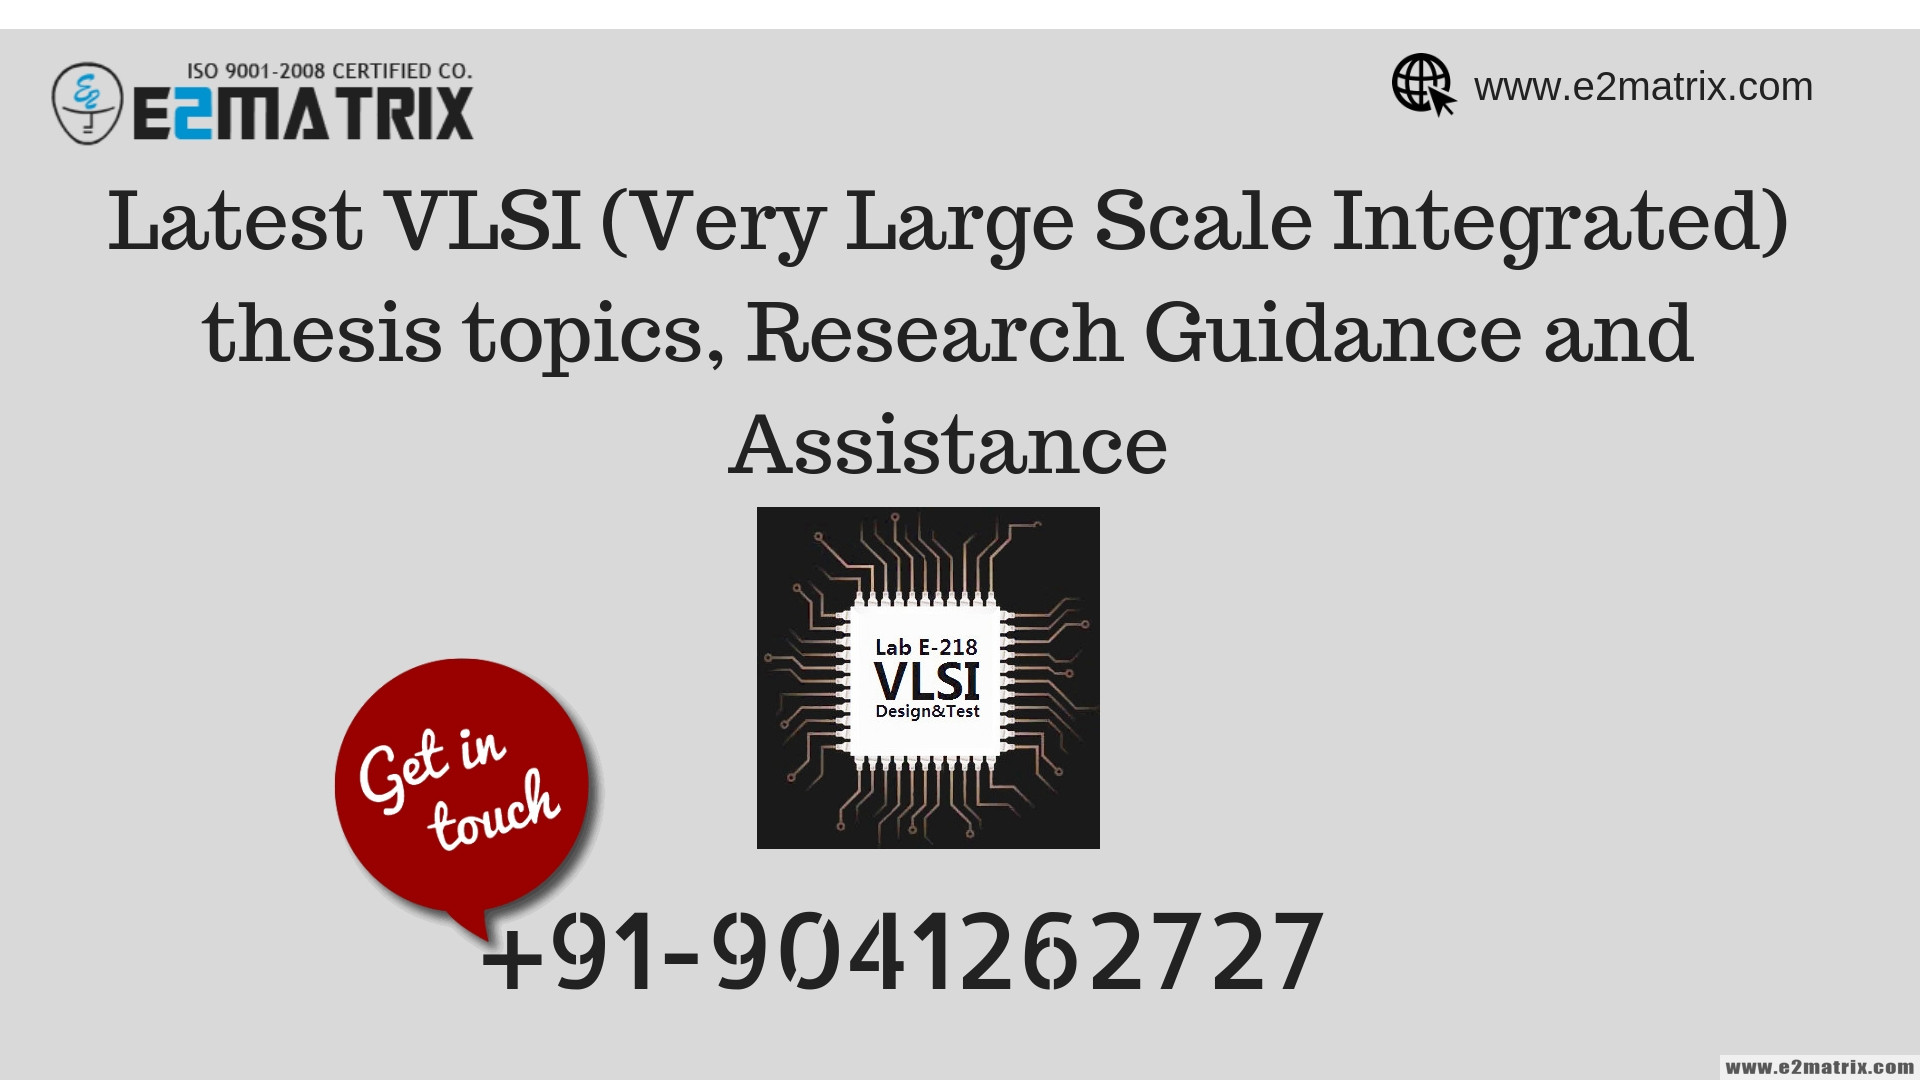 Latest VLSI (Very Large Scale Integrated) thesis topics, Research Guidance and Assistance